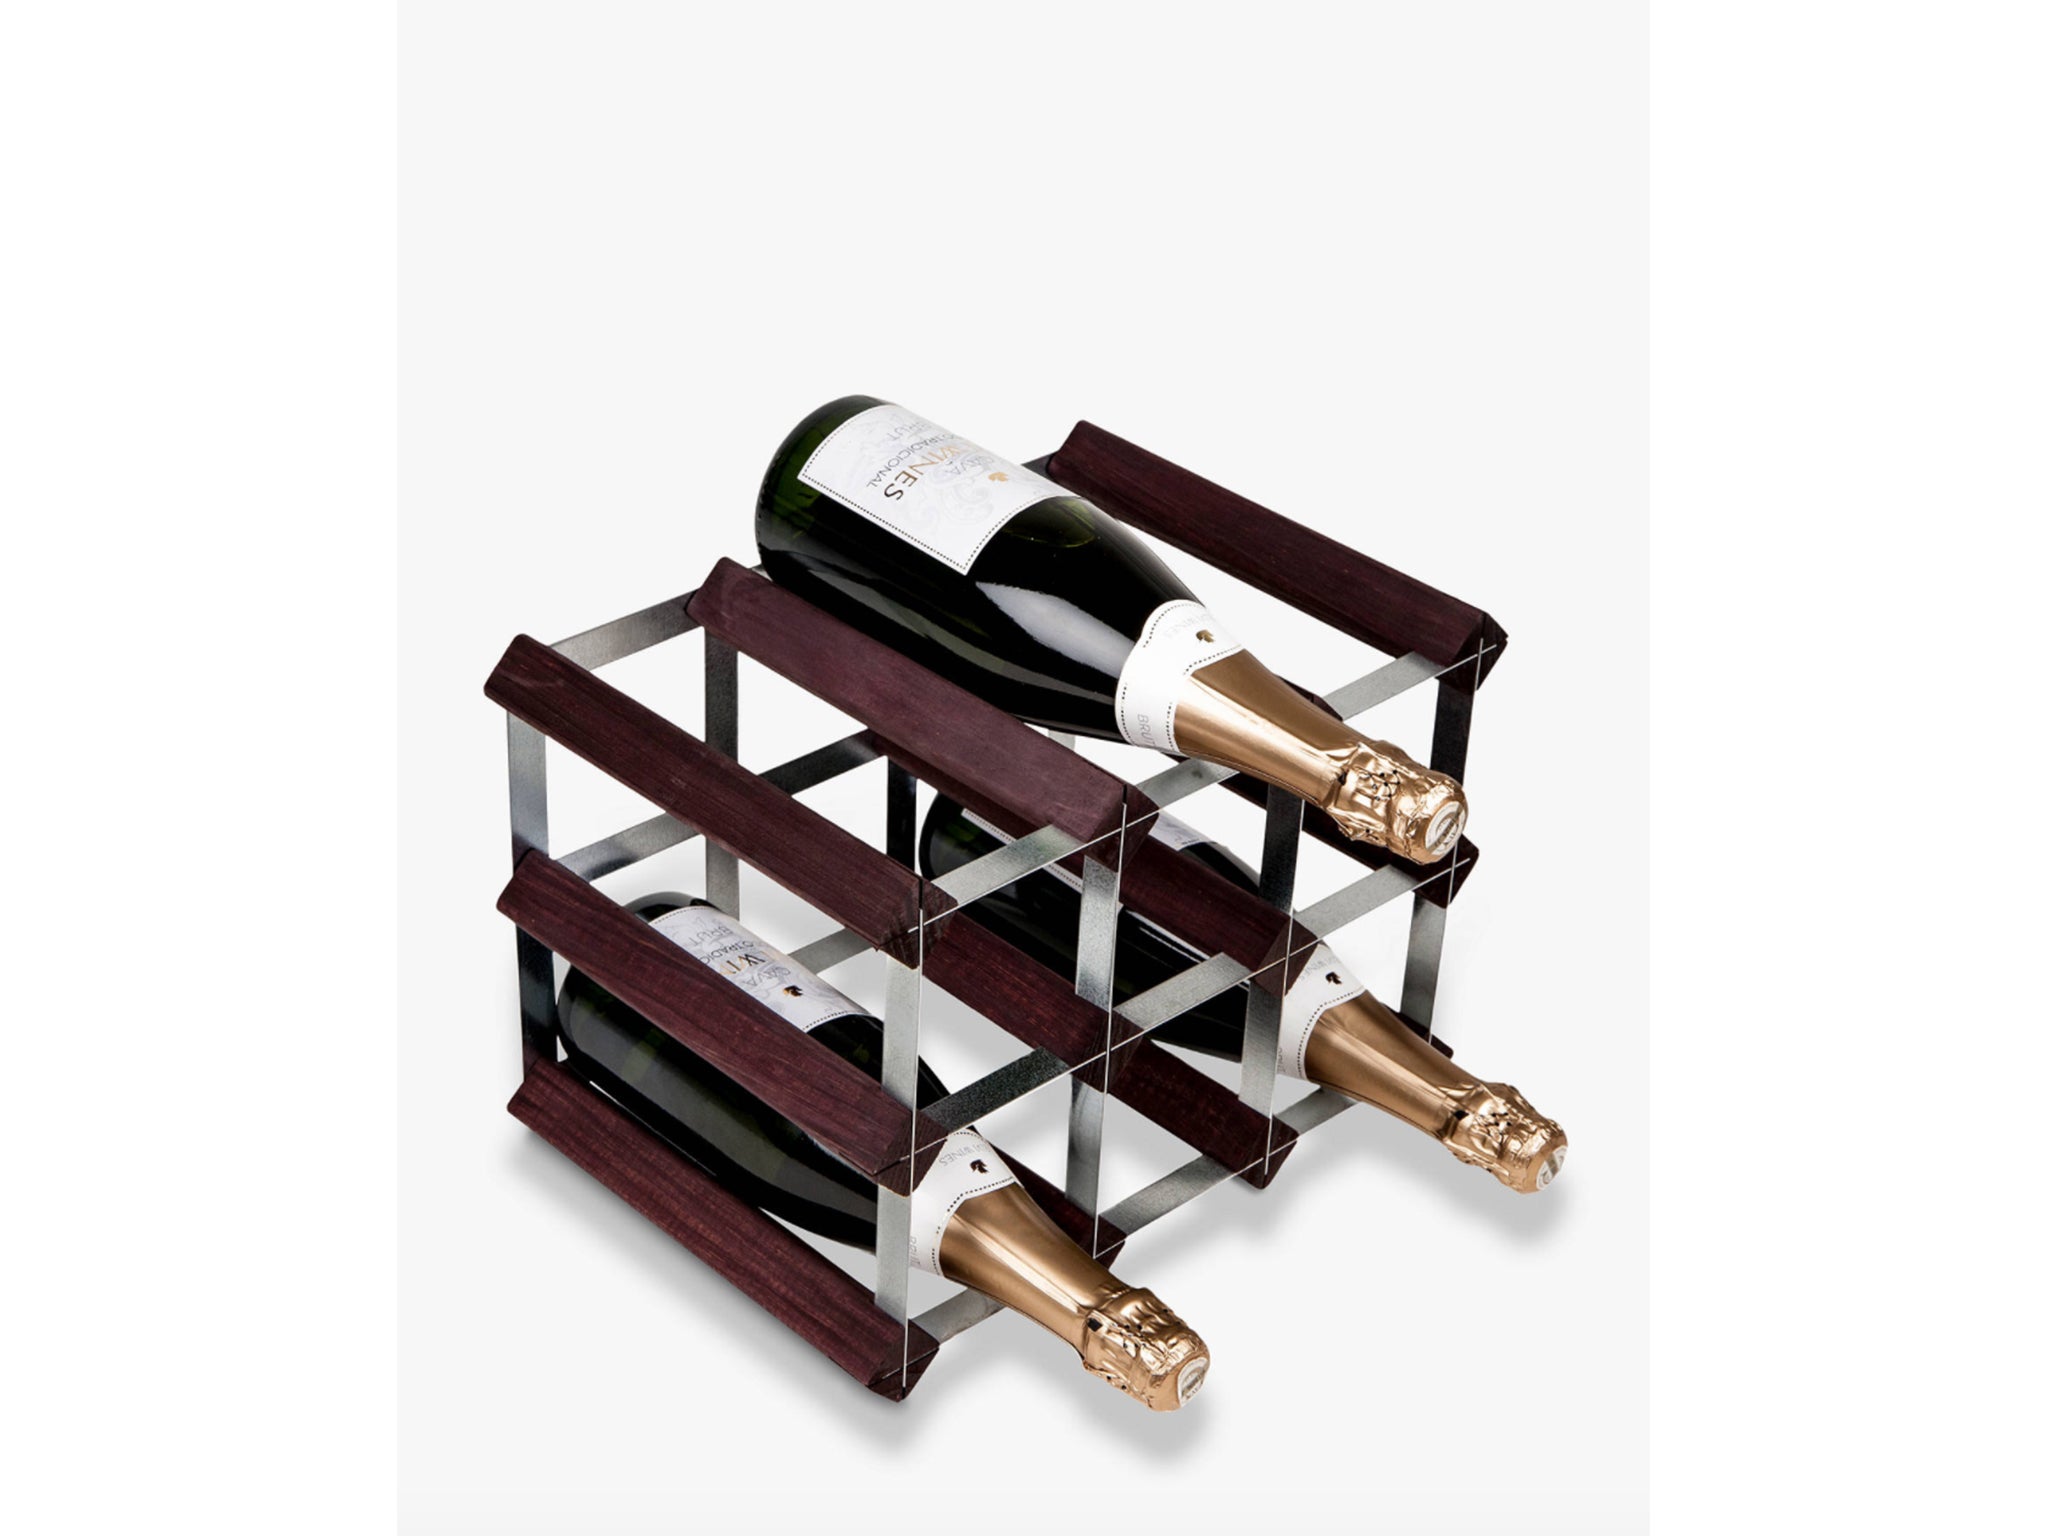 If you're looking to store your favourite bottles properly, try a sleek wine rack (John Lewis and Partners)